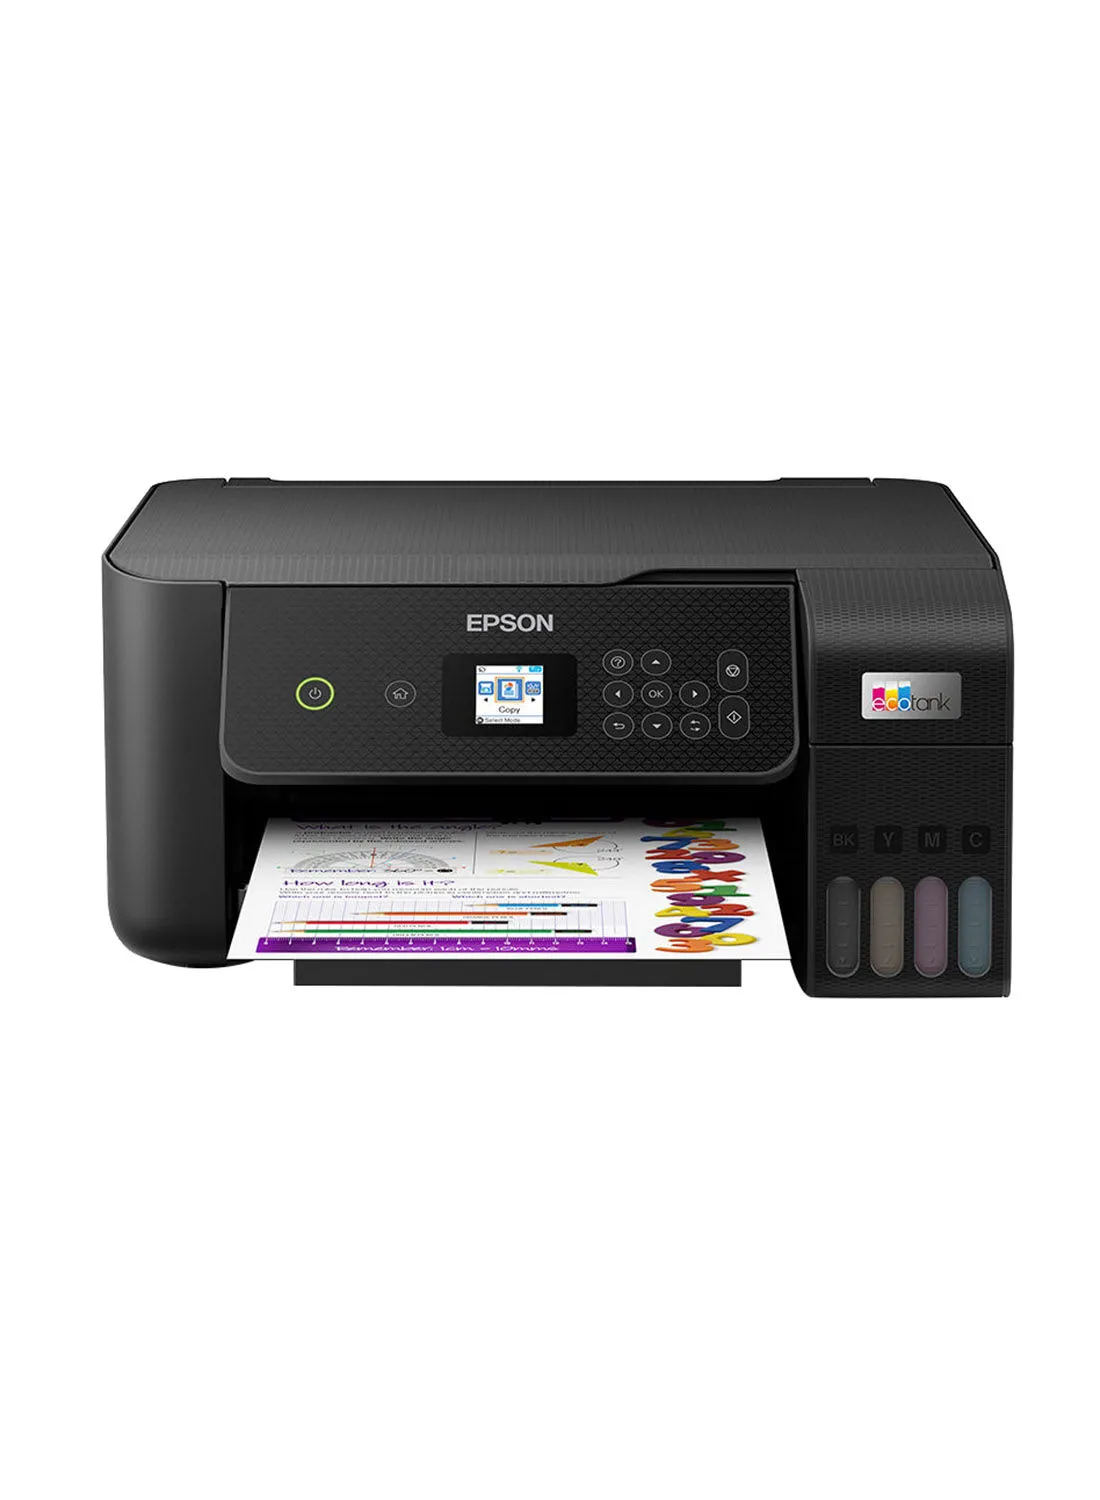 EPSON EcoTank L3260 Home Ink Tank Printer A4, Colour, 3 in 1 with WiFi and SmartPanel App Connectivity Black